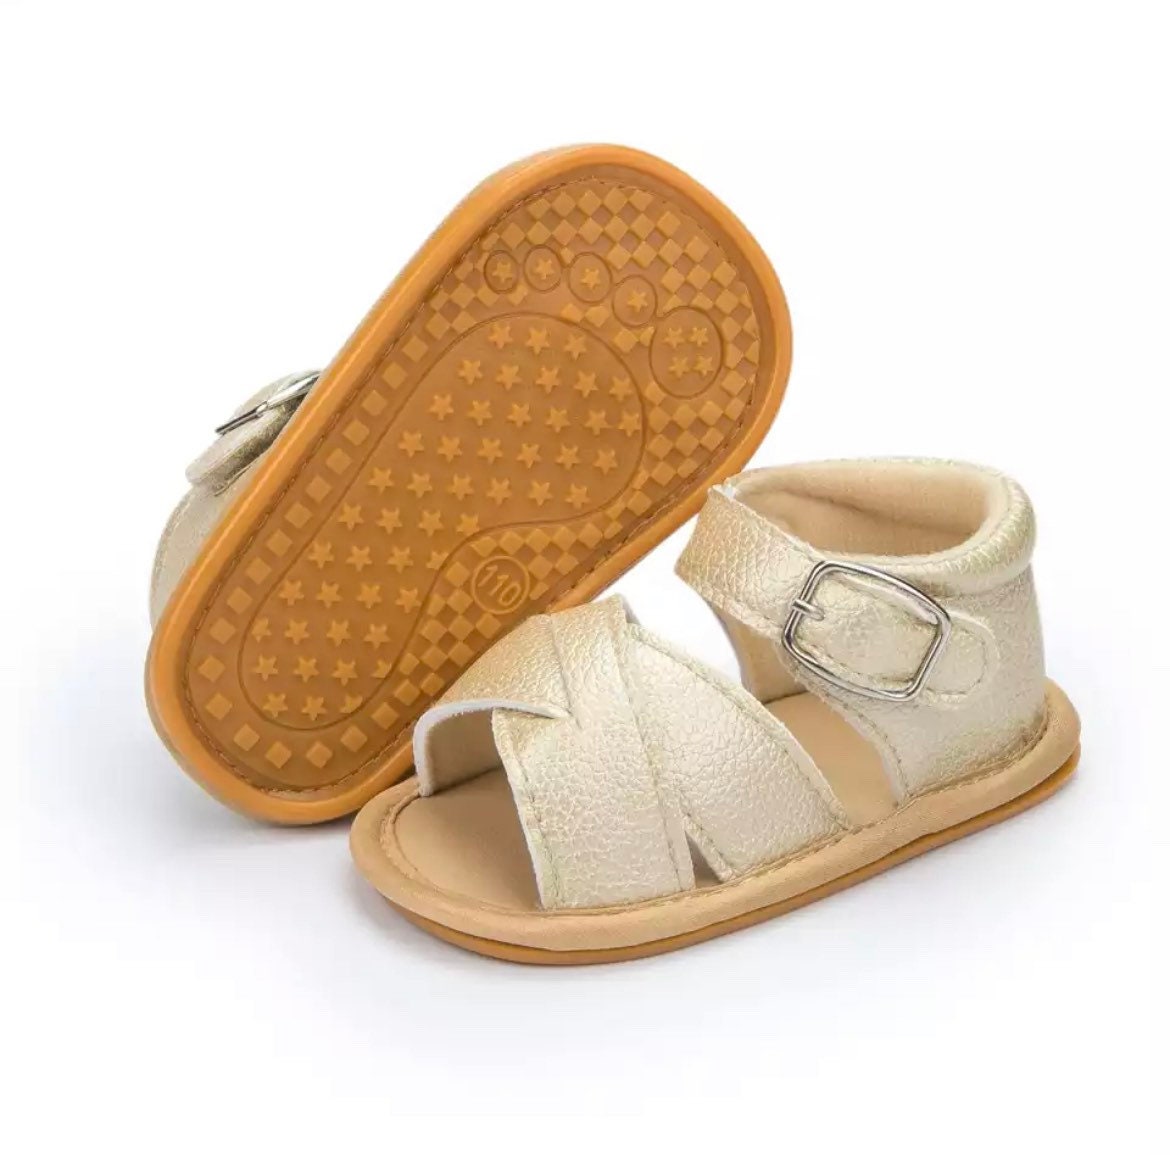 Lucy - Baby Girl Leather Sandals, First Walker-
Welcome! Thanks for looking in our shop and viewing these beautiful baby shoes.Our high quality first walker shoes are durable, breathable &amp; super cute on baby’-Bijou Bubs